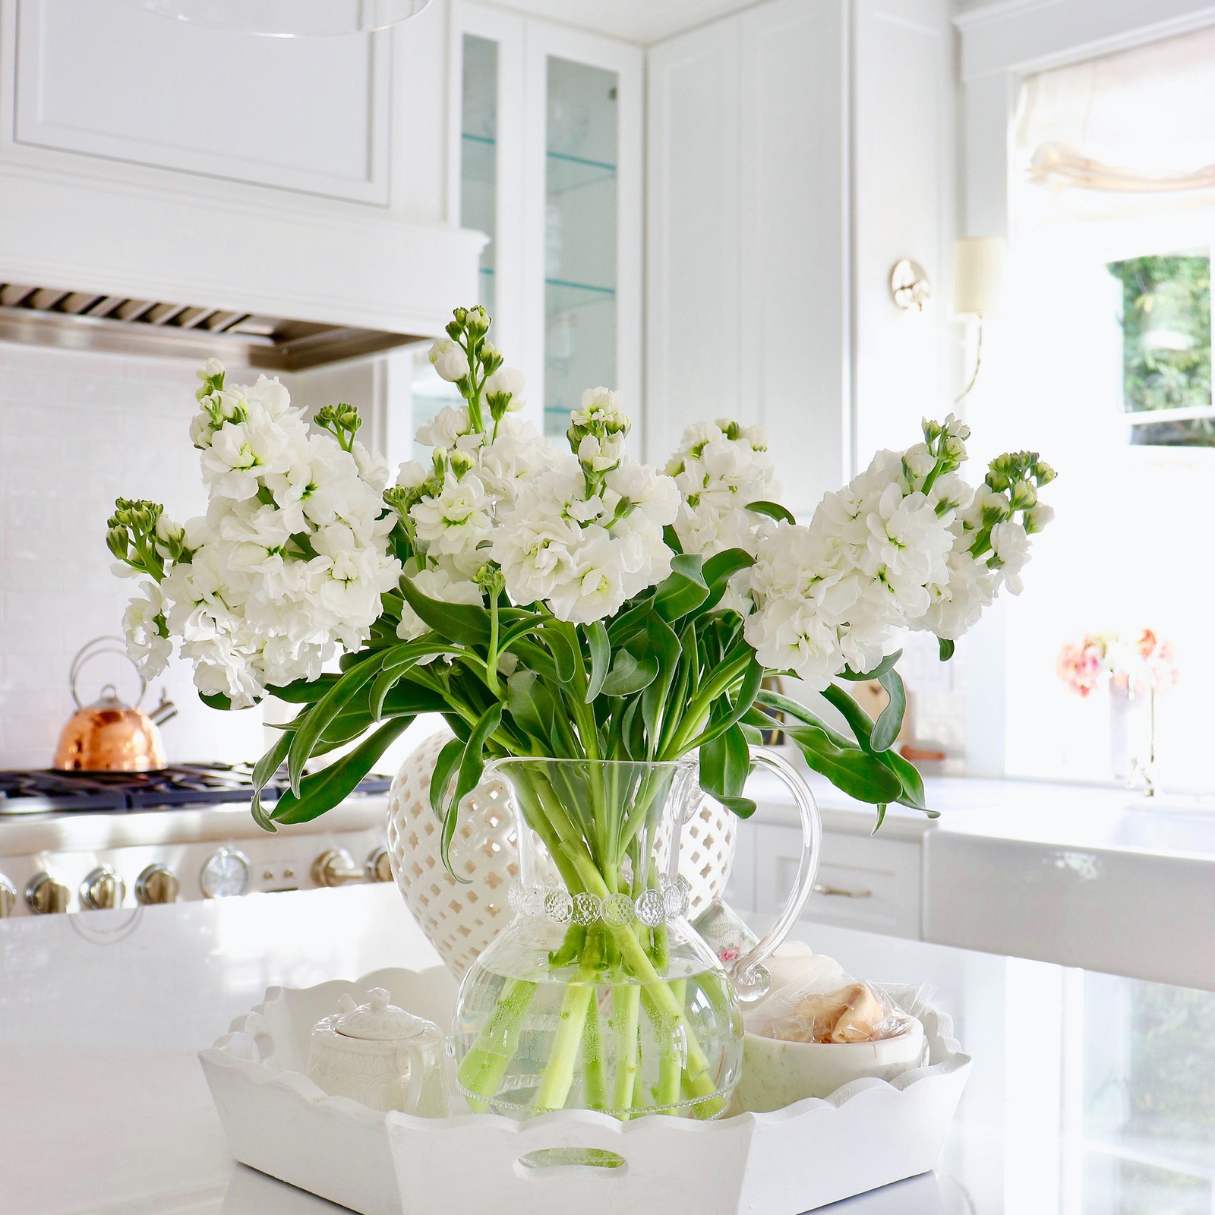 What Kind Of Floral Arrangements To Make For The Month Of January For Your Home